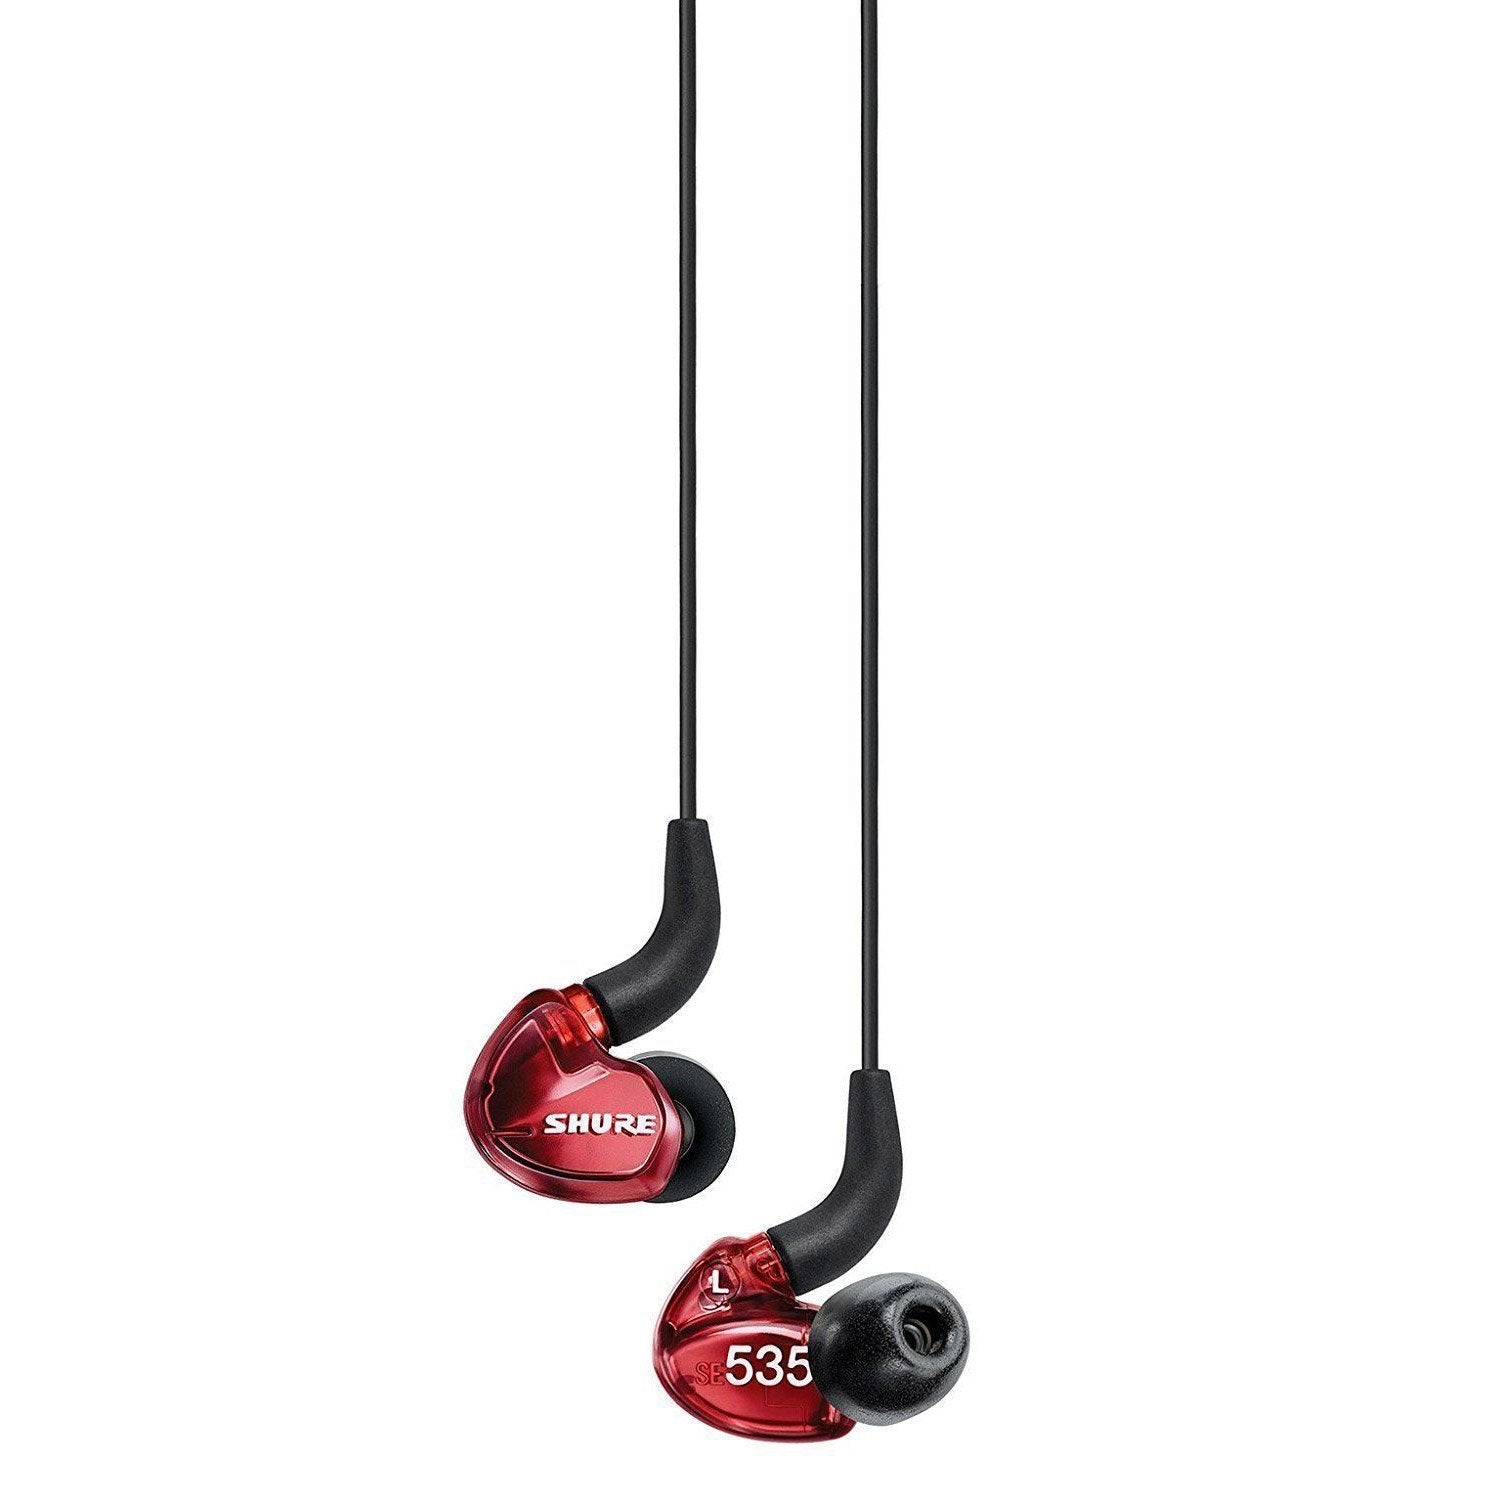 Shure SE535LTD Limited Edition Red Sound Isolating Earphones with Remote + Mic